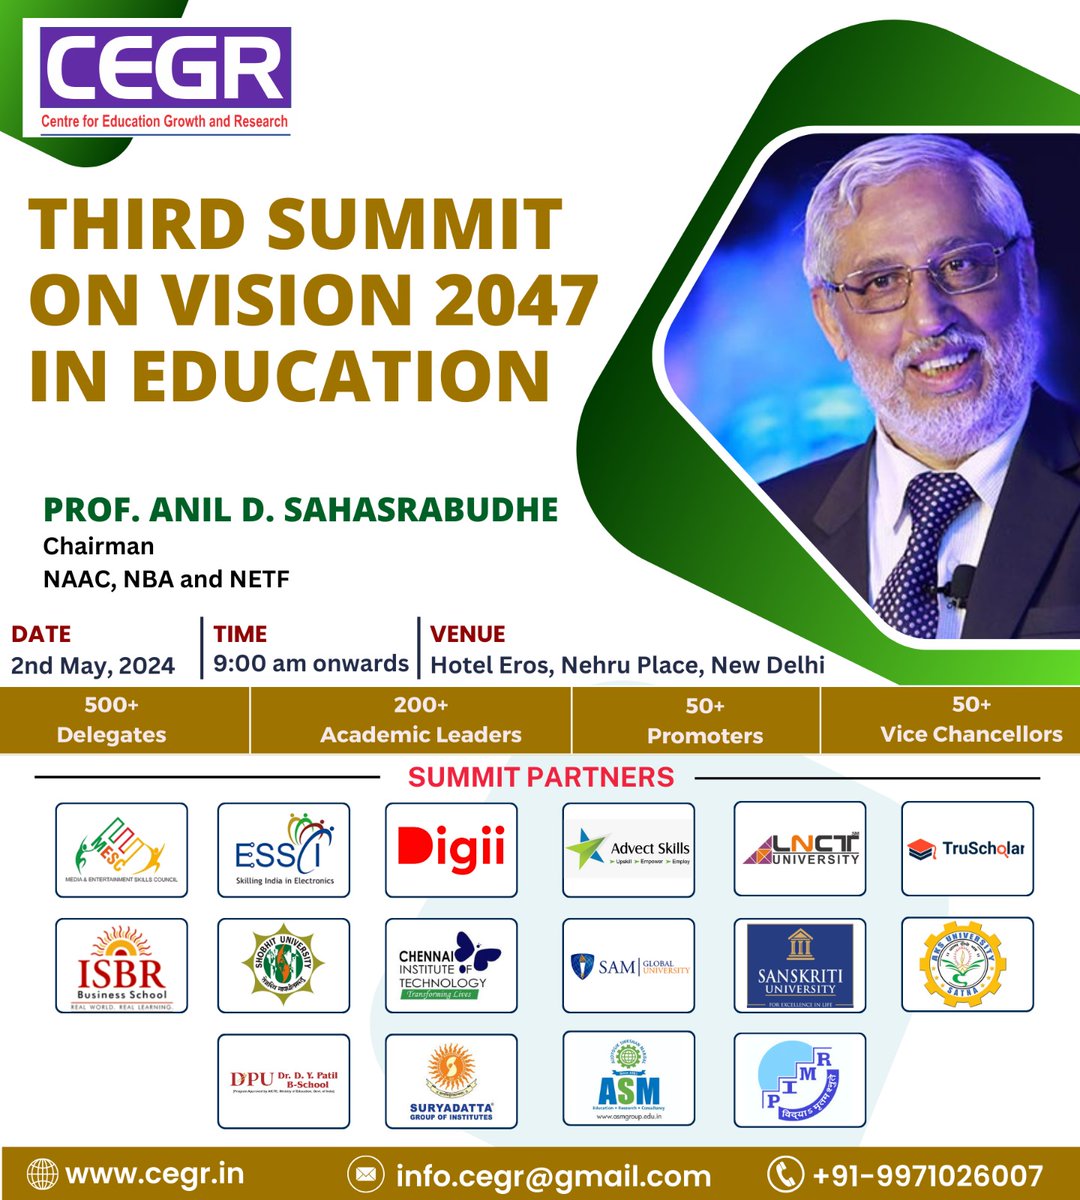 We are delighted to Welcome Prof. Anil D. Sahasrabudhe, Chairman, NAAC, NBA and NETF in Third Summit on Vision 2047 in Education on 2nd May, 2024 (Thursday) in Royal Ball Room, Hotel Eros, Nehru Place, New Delhi.
To Know more, please visit cegr.in/events.php
#CEGR #CEGRLeads